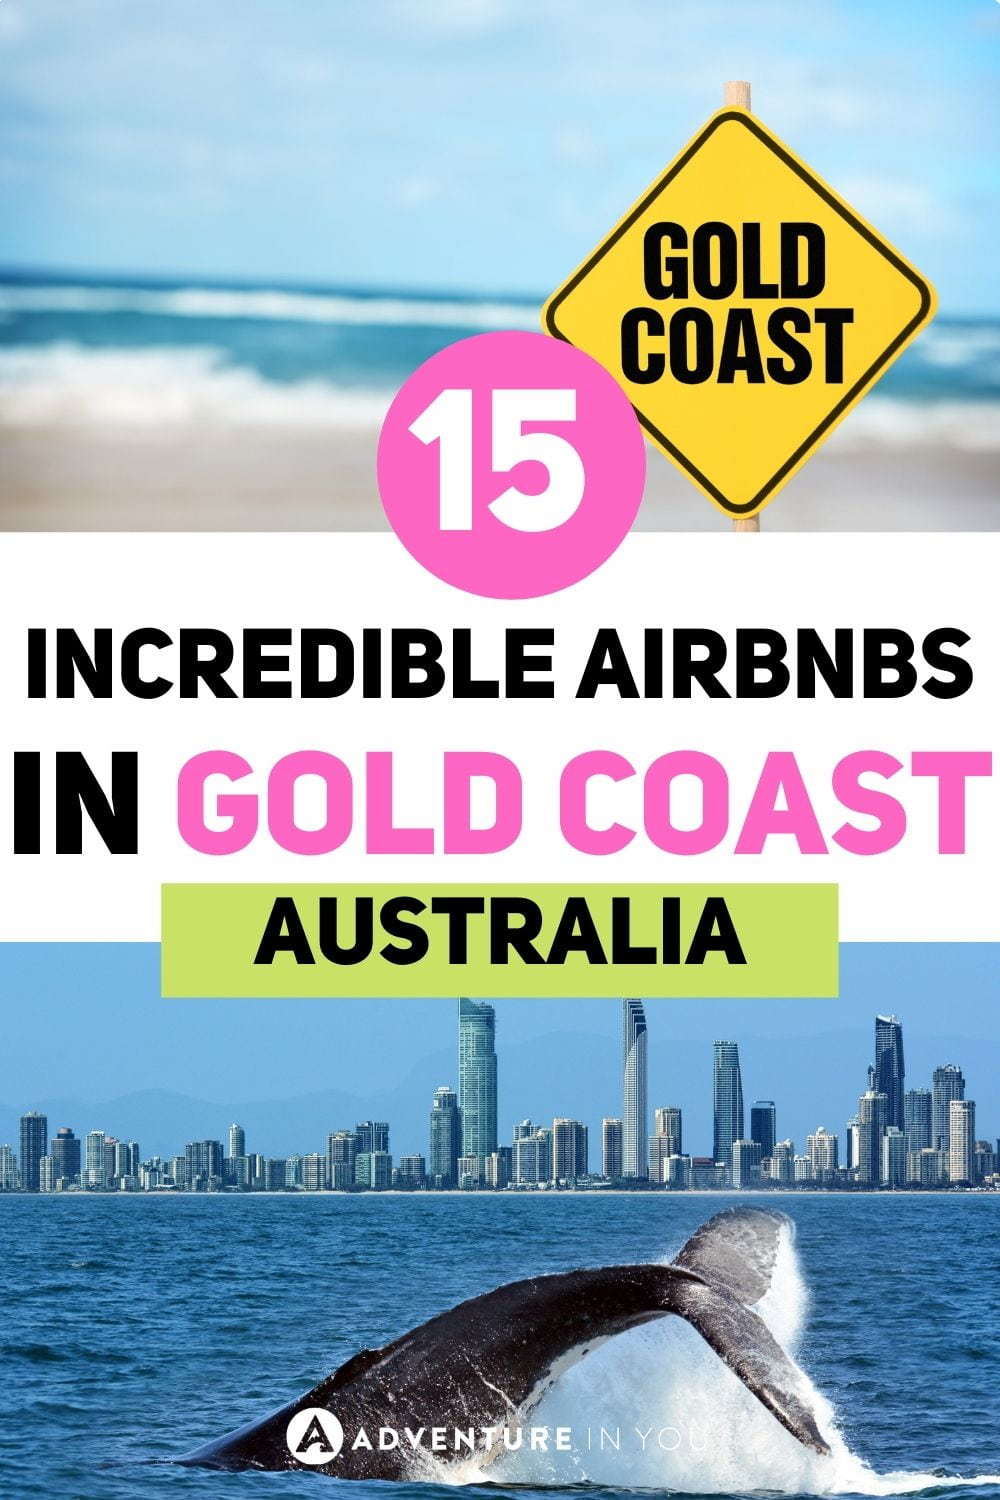 Airbnbs in Gold Coast | Looking for the best Airbnbs in Gold Coast Click here to see our top picks. #australia #queensland #goldcoast #wheretostayingoldcoast